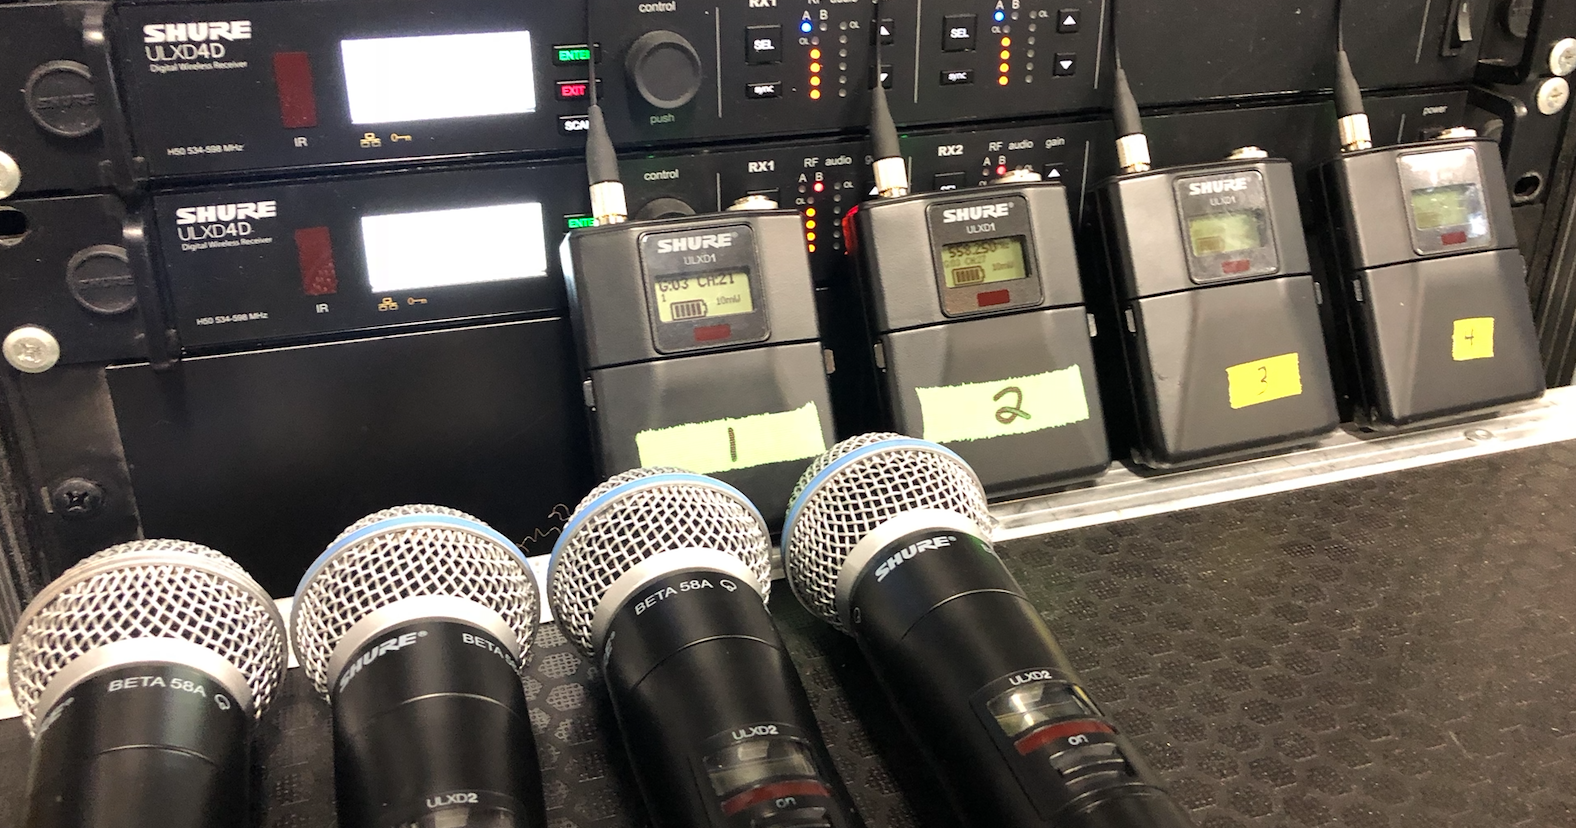 An image of Shure wireless microphones